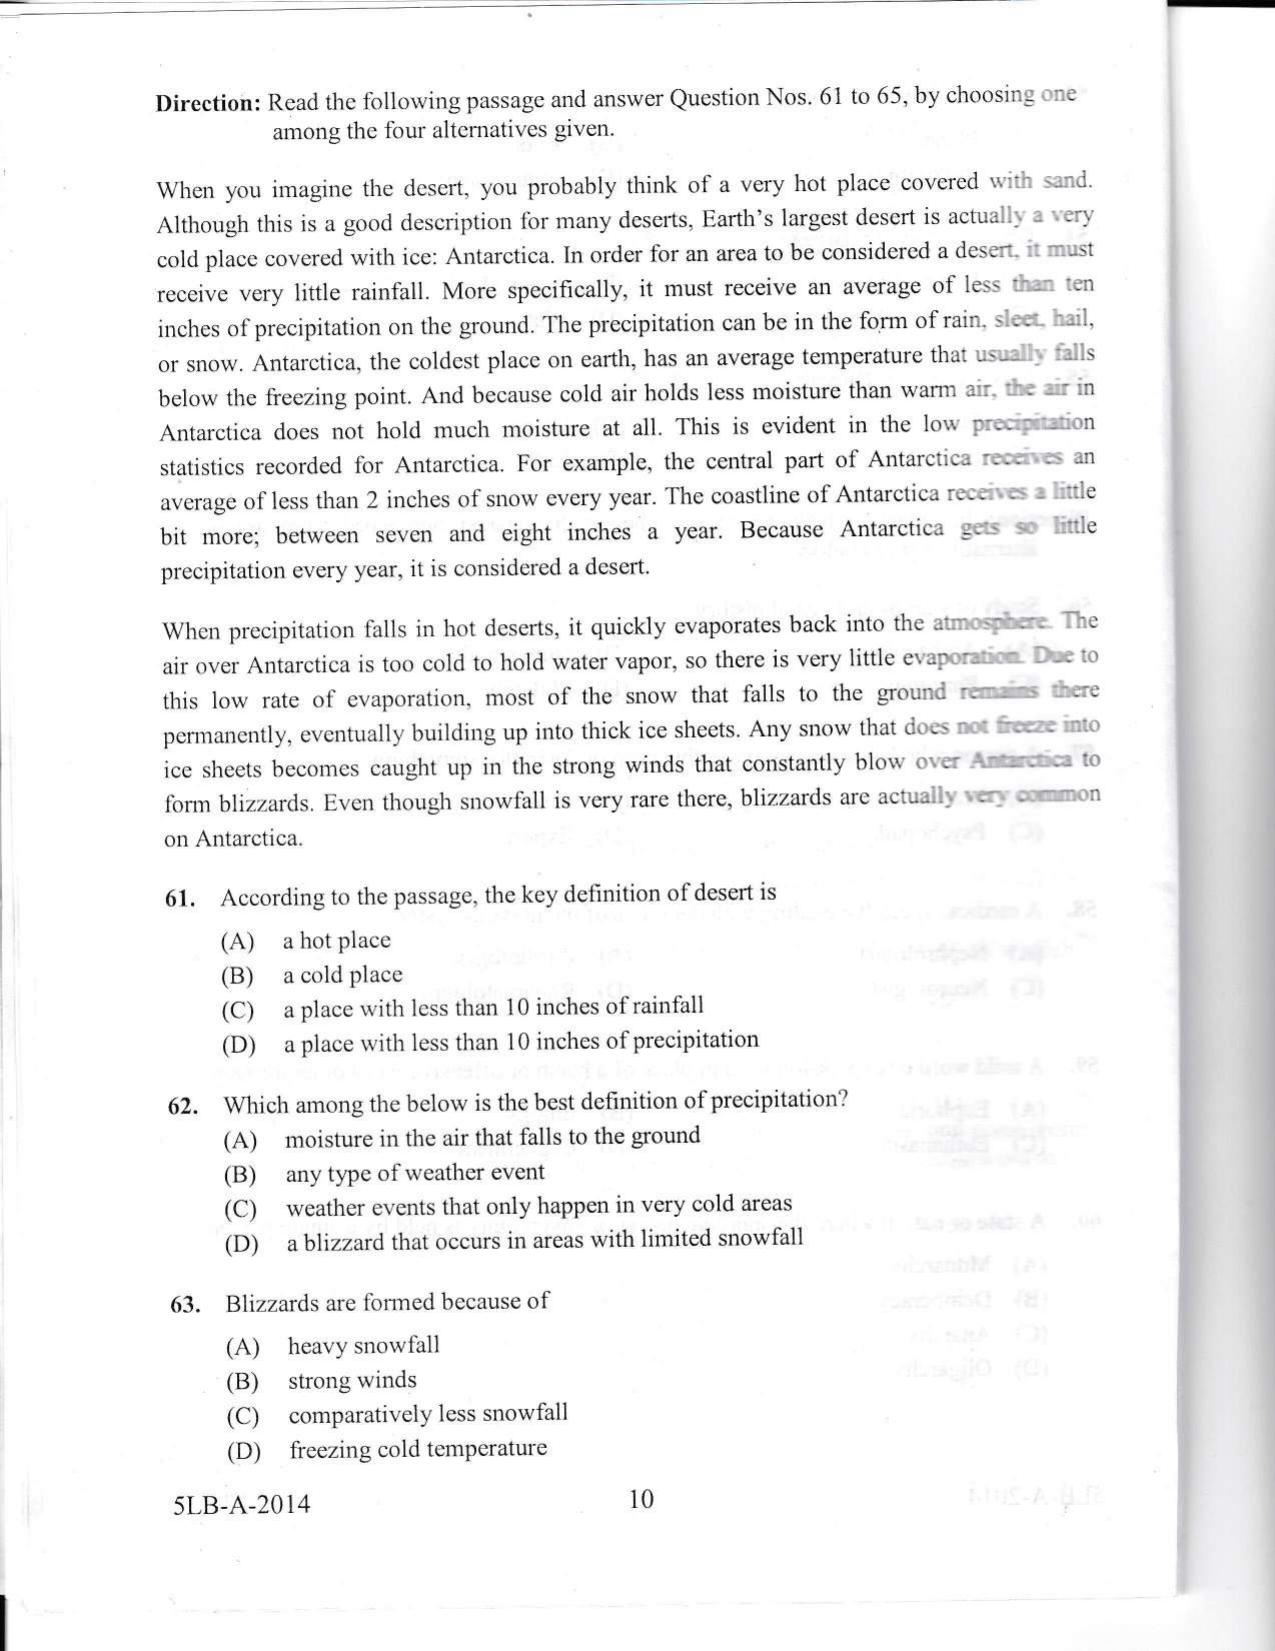 KLEE 5 Year LLB Exam 2014 Question Paper - Page 10